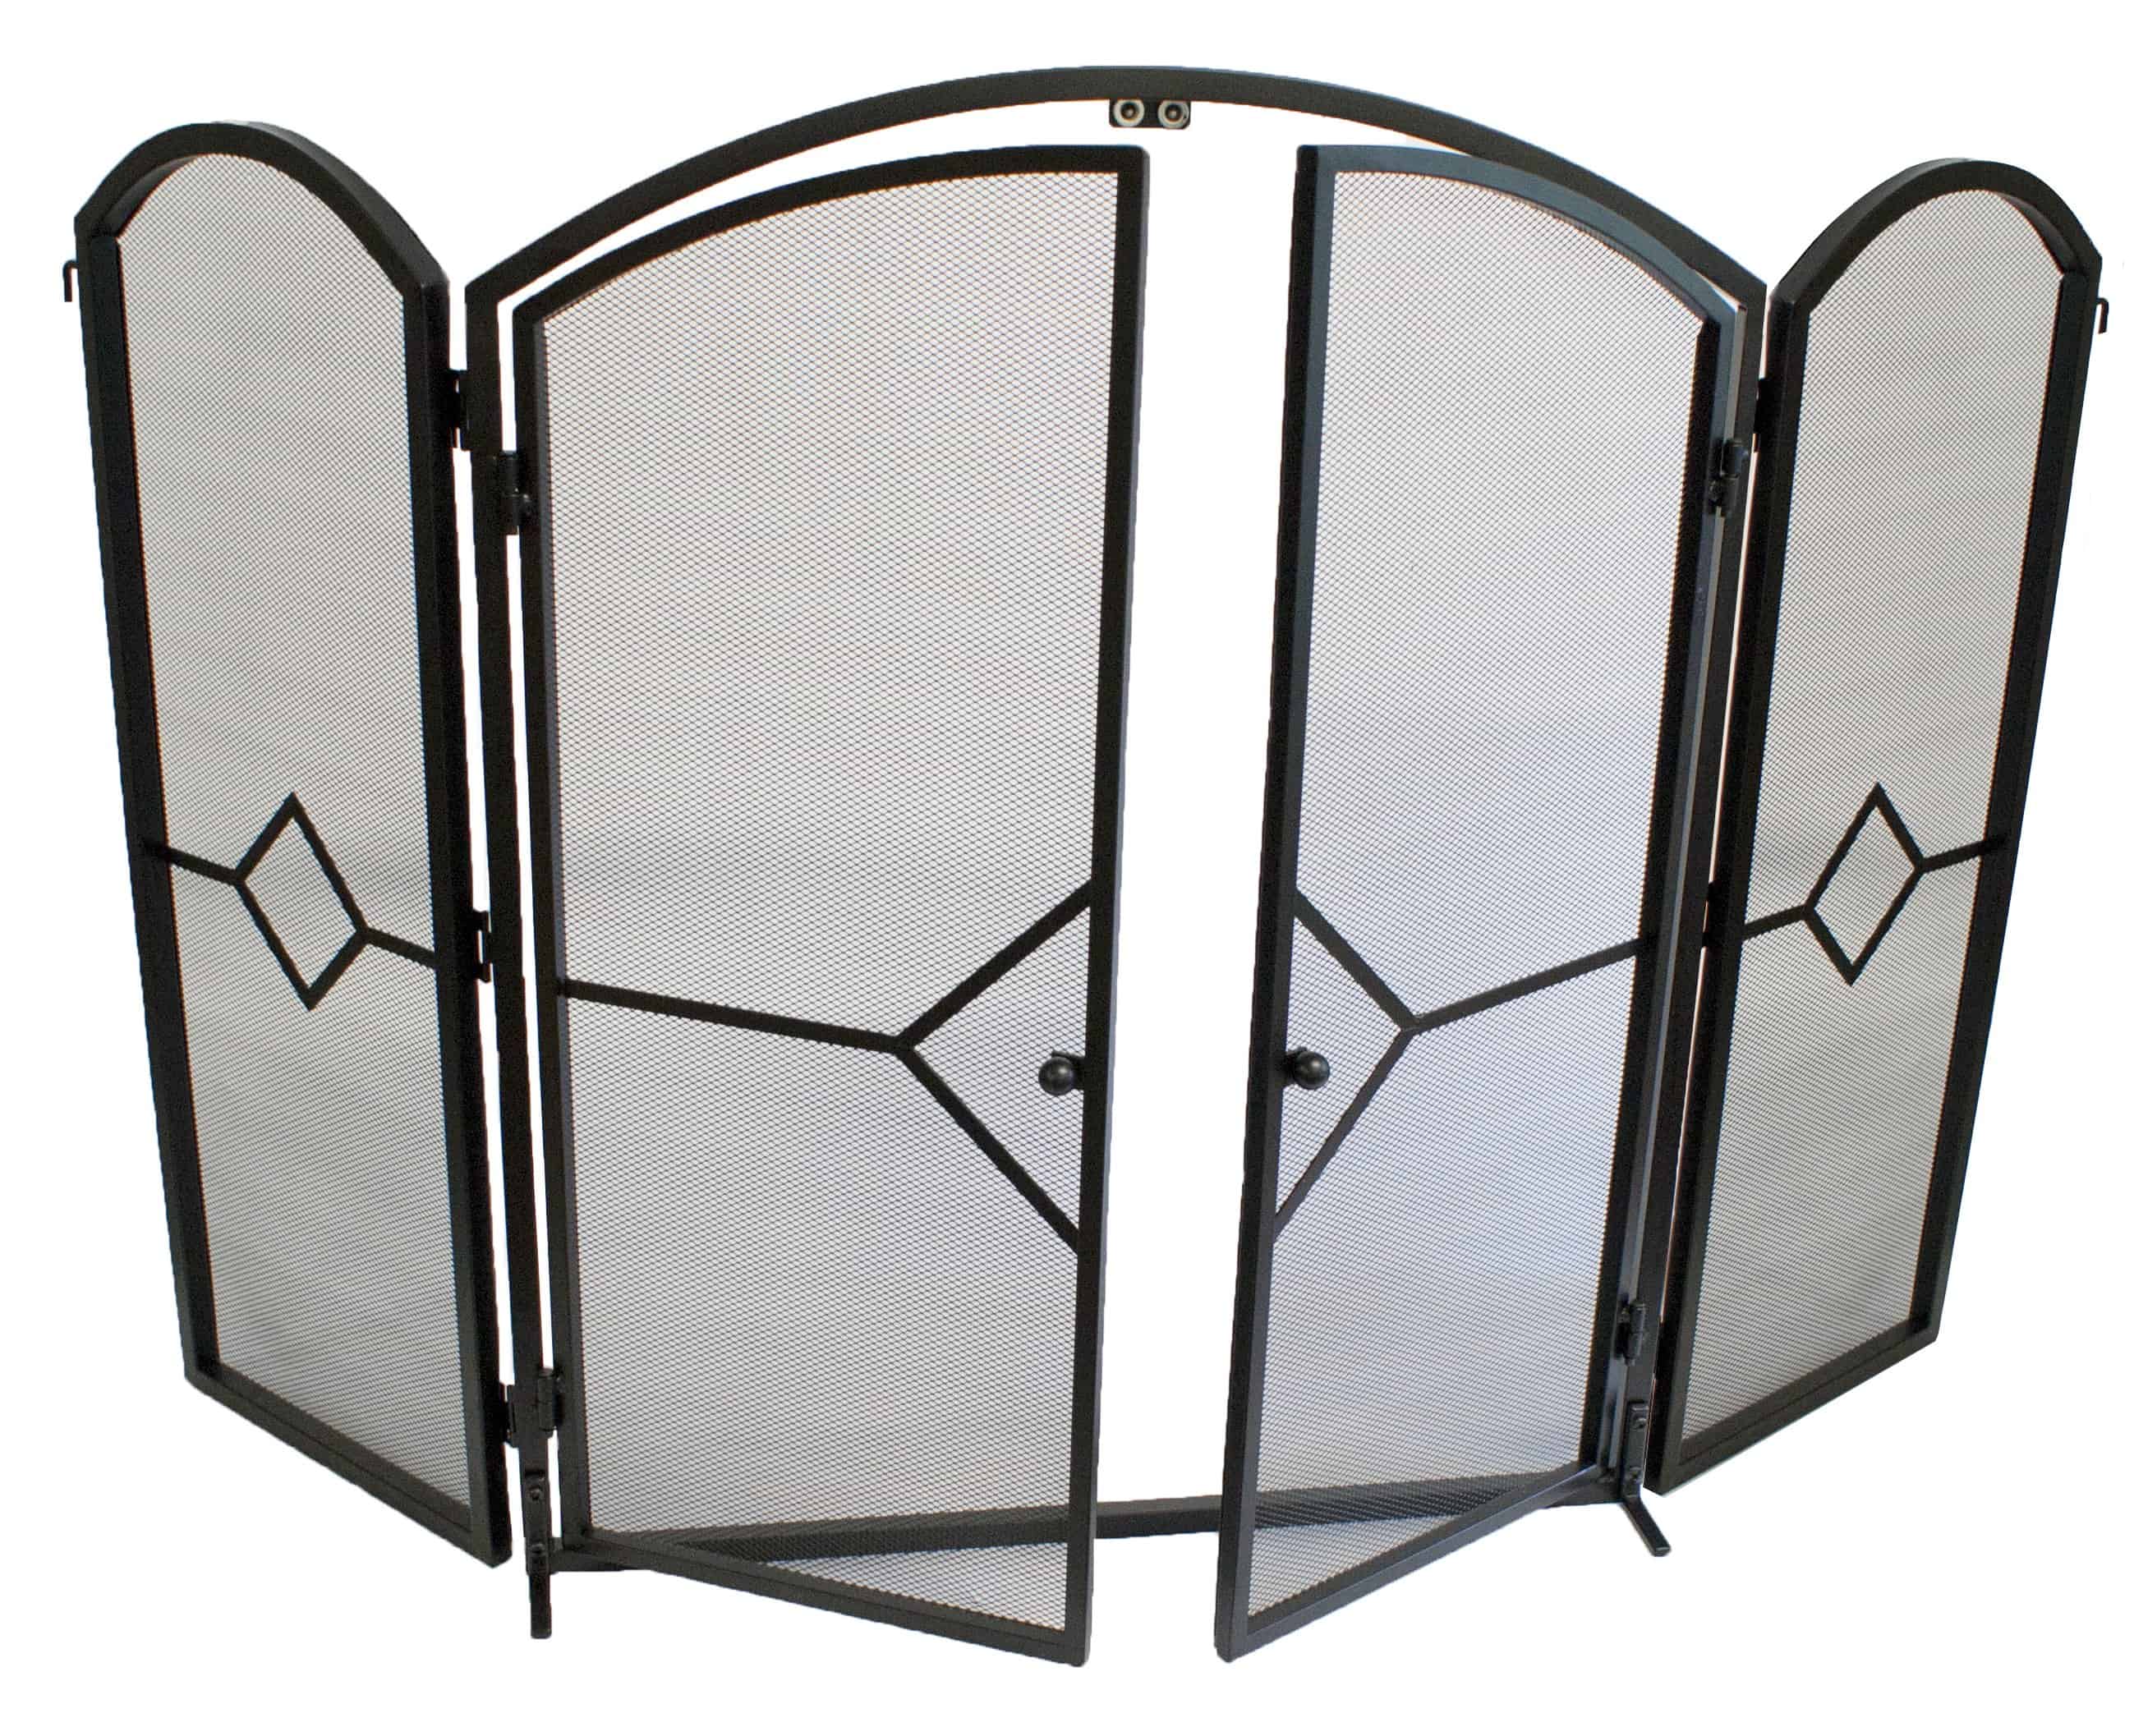 FireUp Opening Fire Screen with Gate, Heater Accessories, S&D Berg